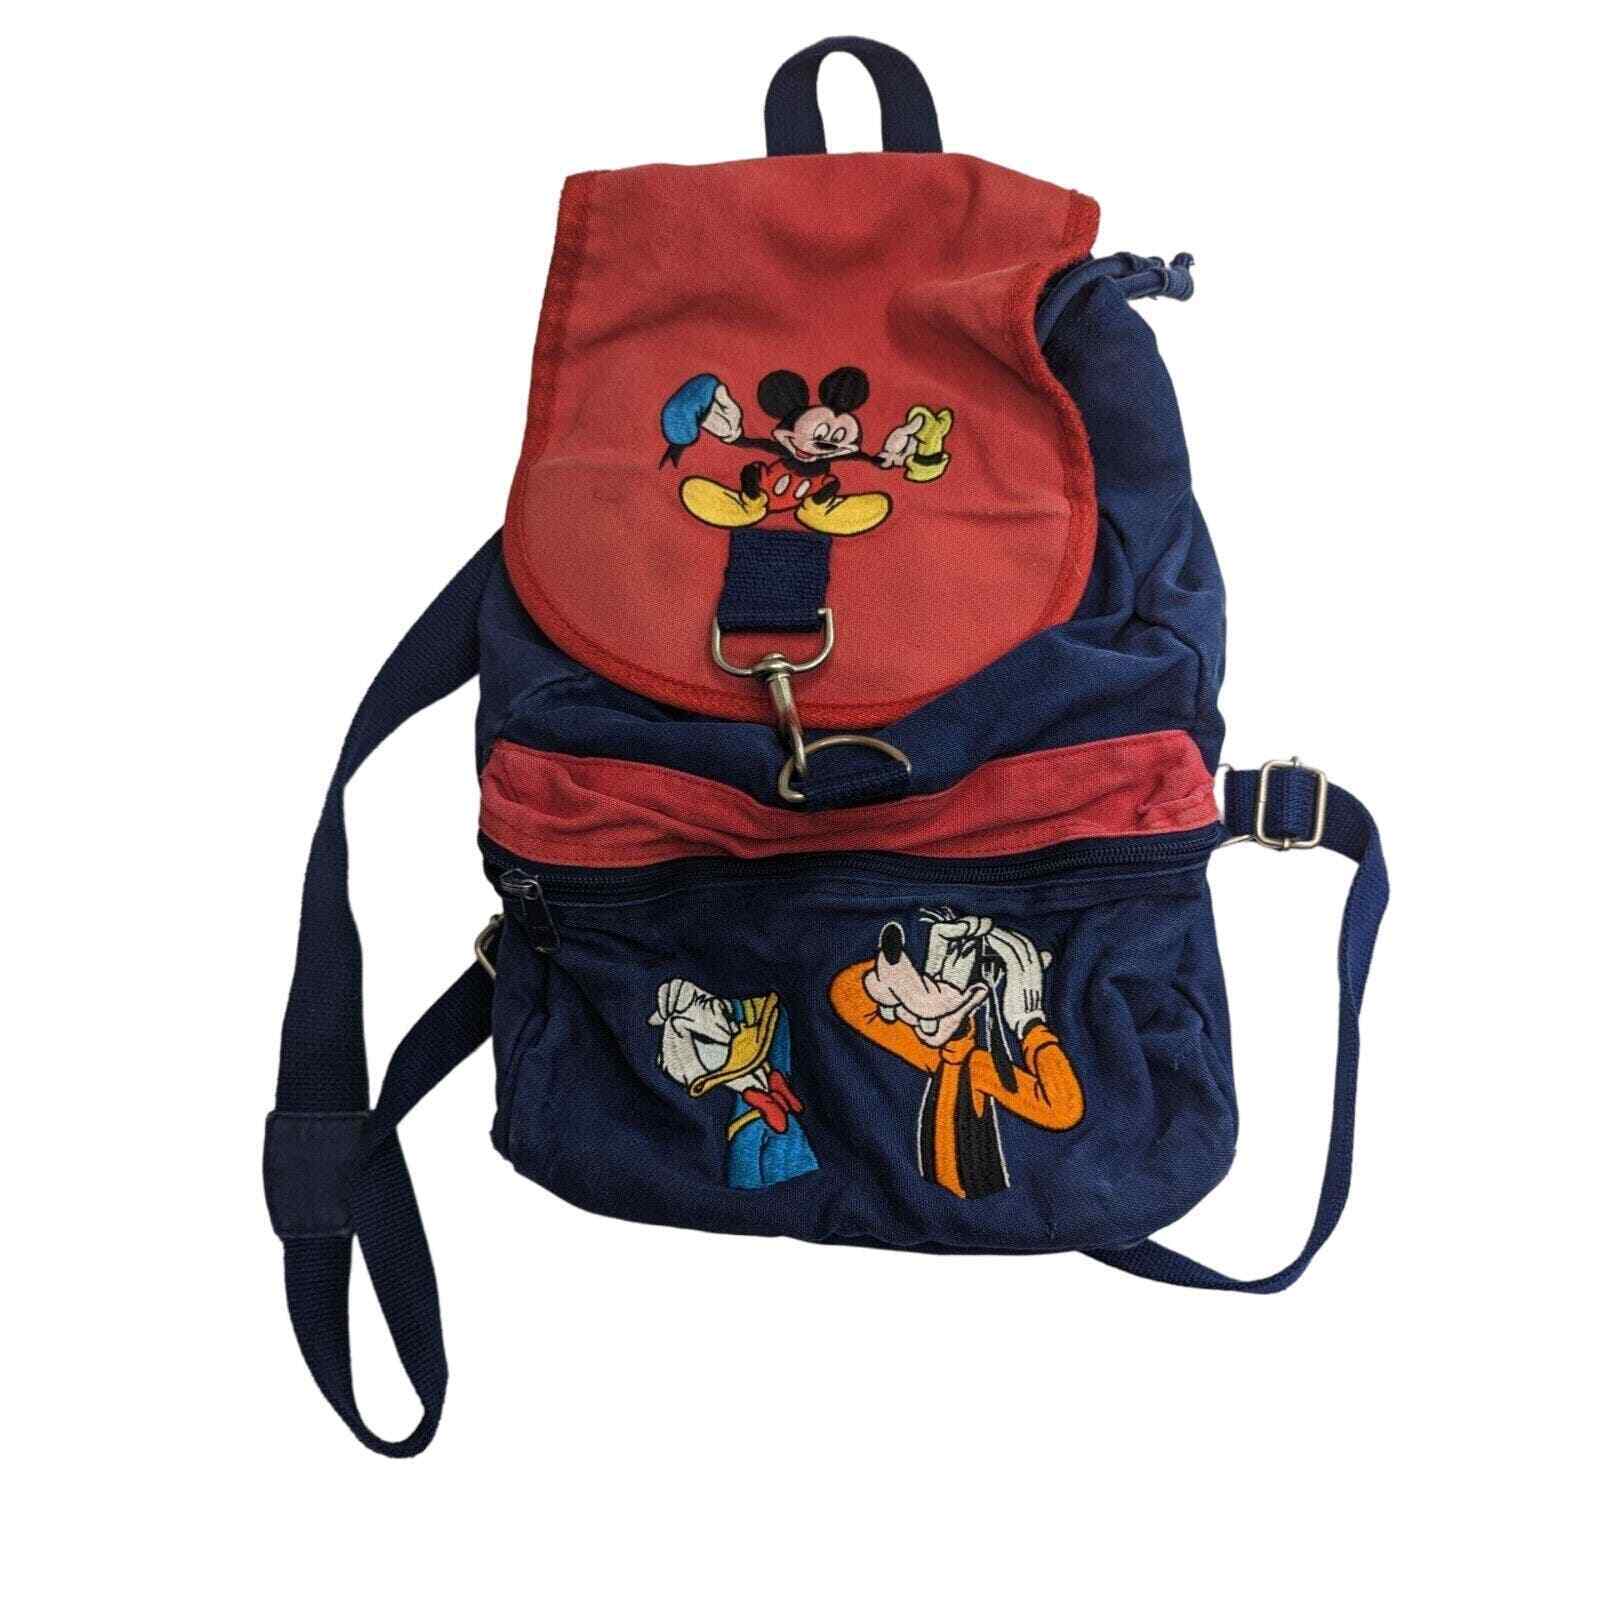 VTG 90s Mickey Mouse & Friends Embroidered Drawstring Backpack Red Blue